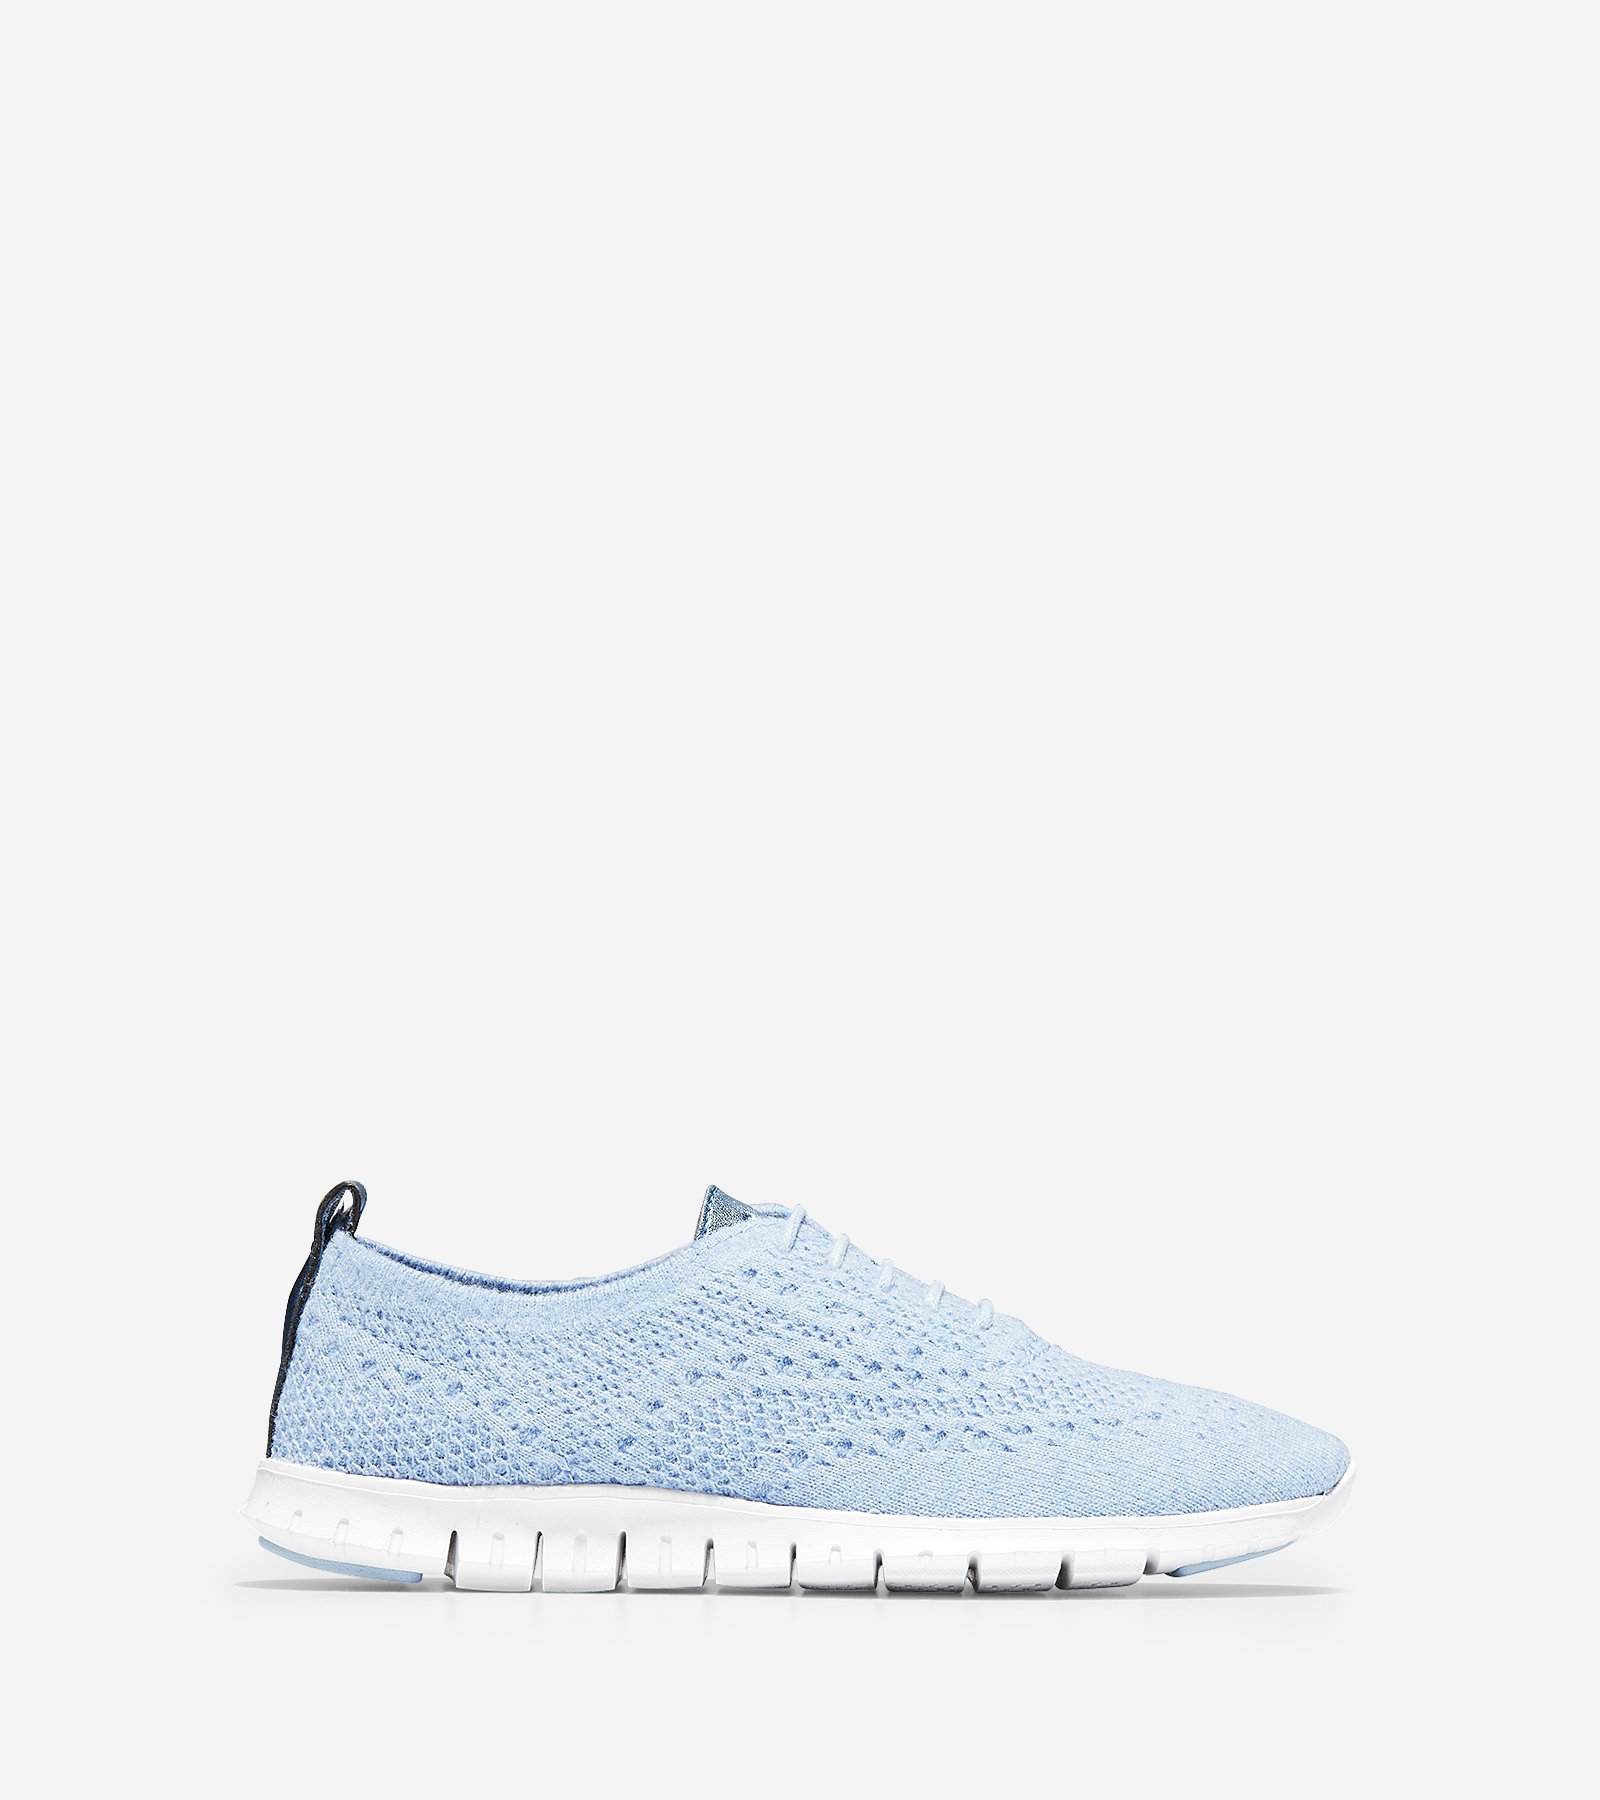 Cole Haan Women’s ZERØGRAND Oxford with Stitchlite™ Wool in Chambray Blue Heathered Wool - $150